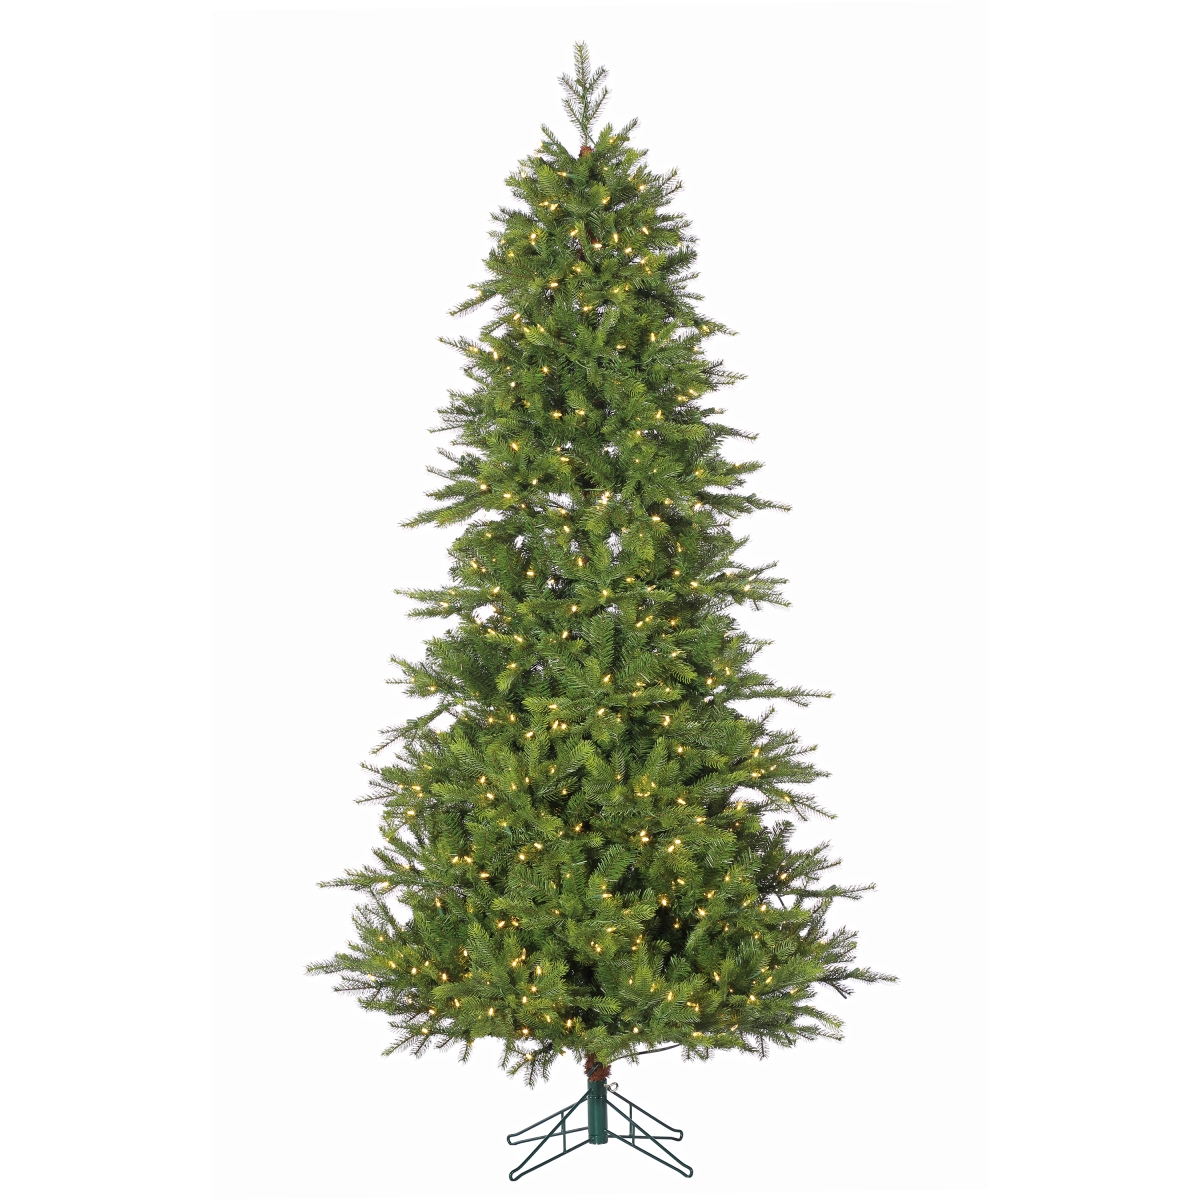 6359--75c 7.5 Ft. Pre-lit Shasta Pine Tree With Instant Glow Power Pole & 750 Led Lights